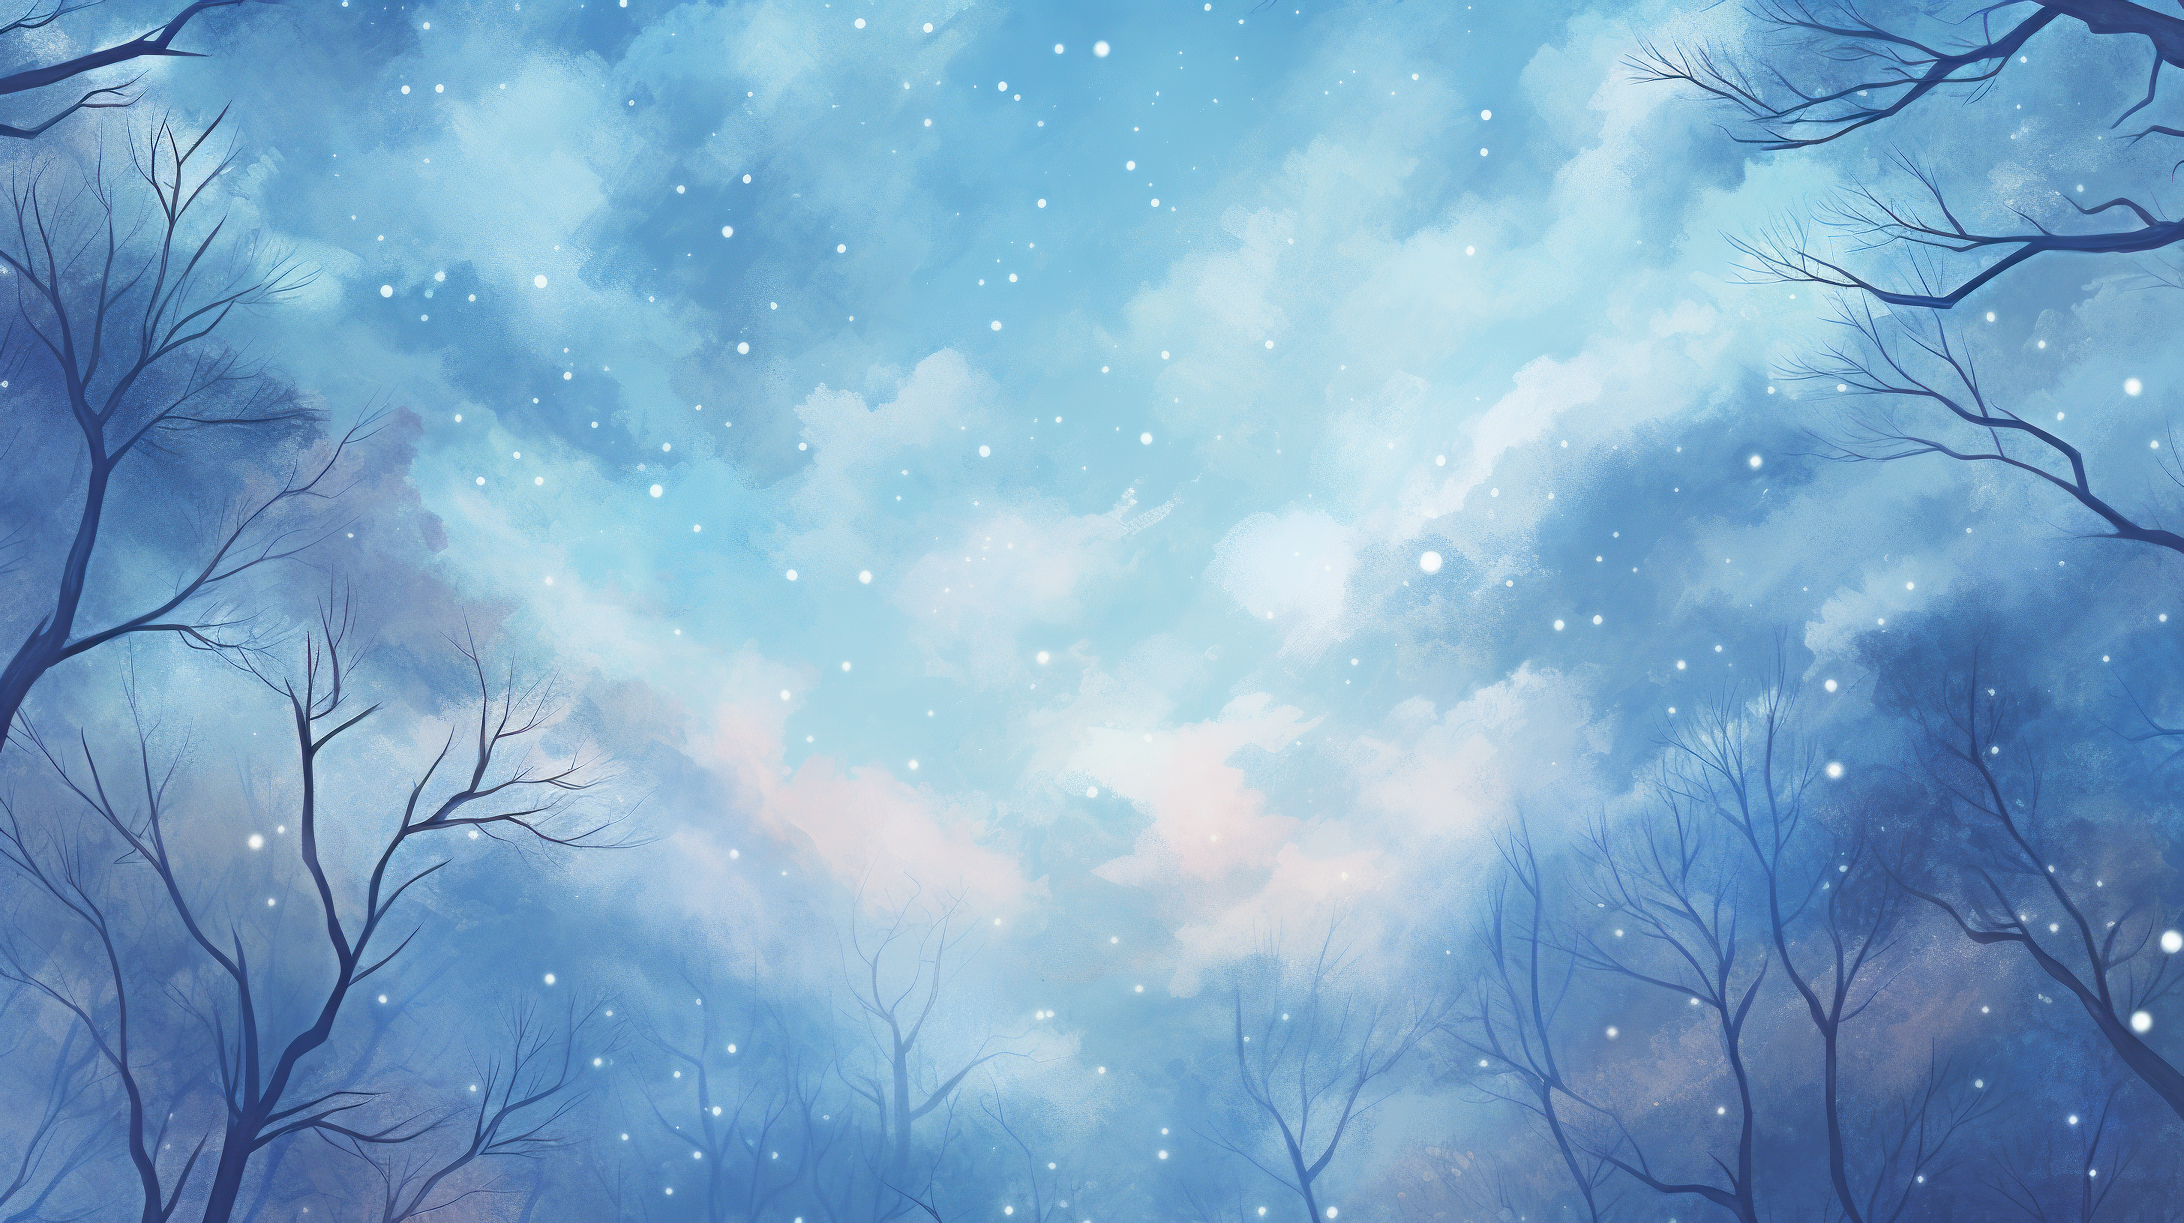 Blue Aesthetic Snow In The Forest Wallpaper By Patrika